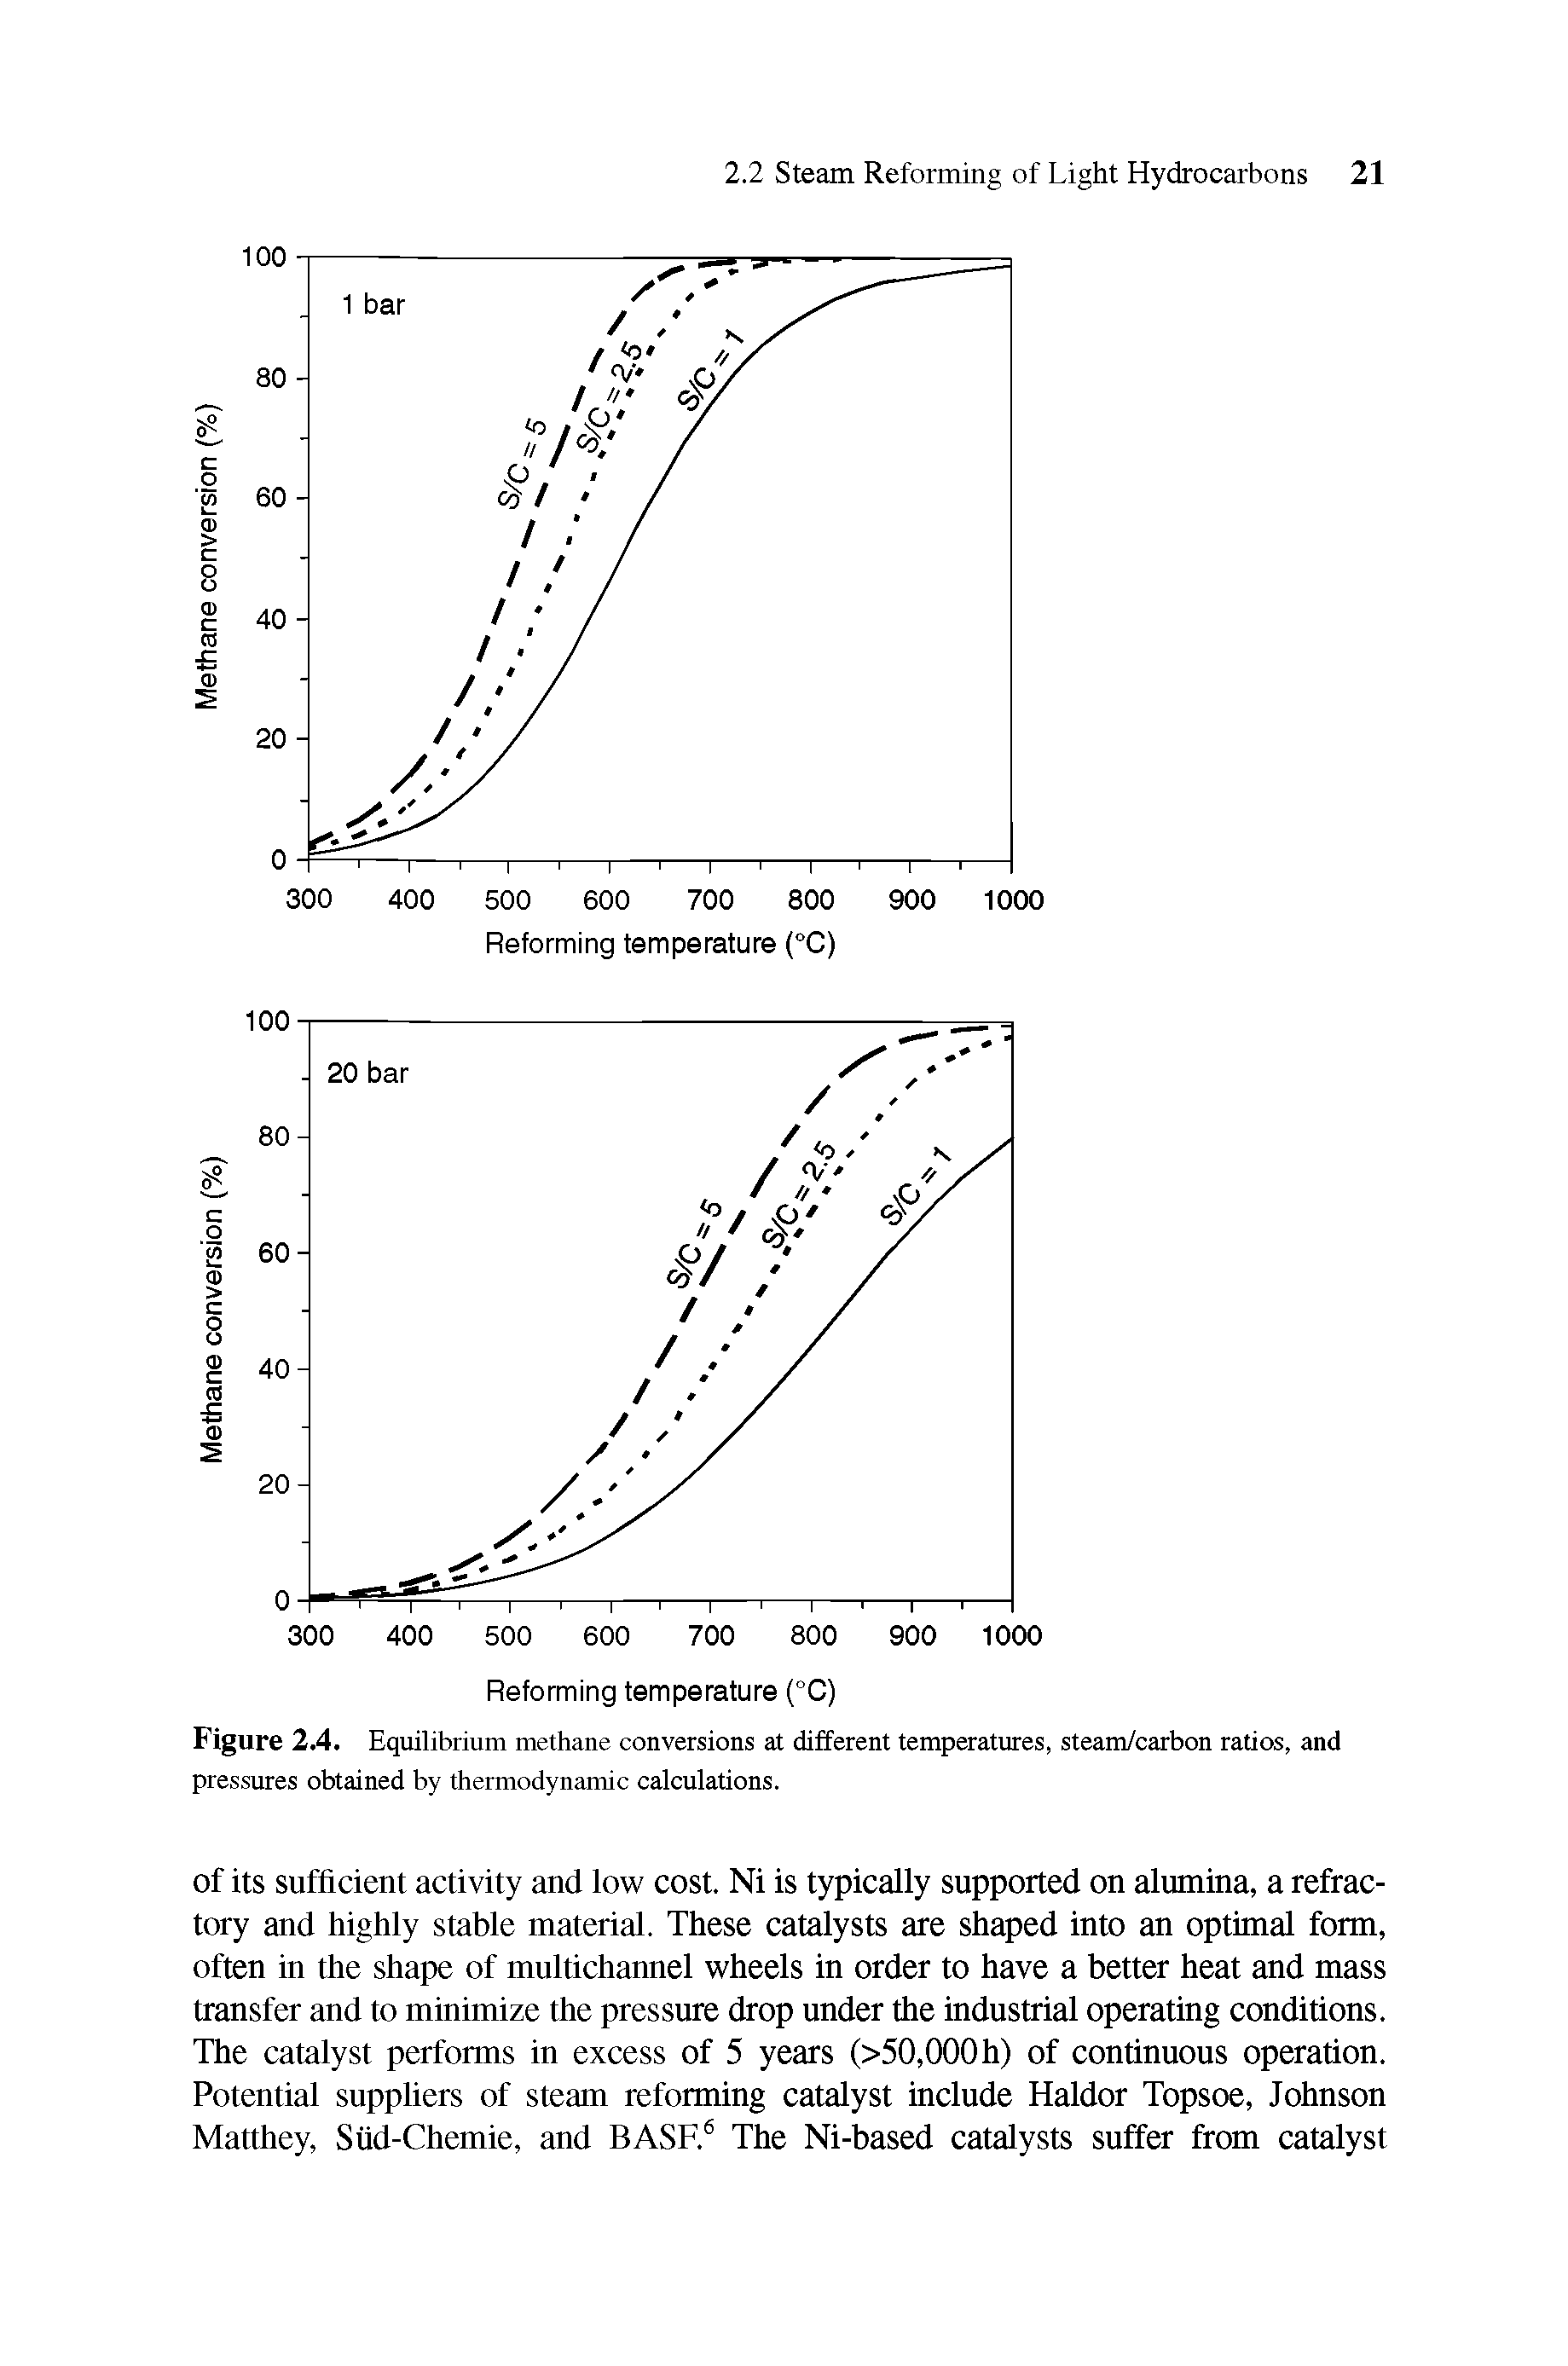 Figure 2.4. Equilibrium methane conversions at different temperatures, steam/carbon ratios, and pressures obtained by thermodynamic calculations.